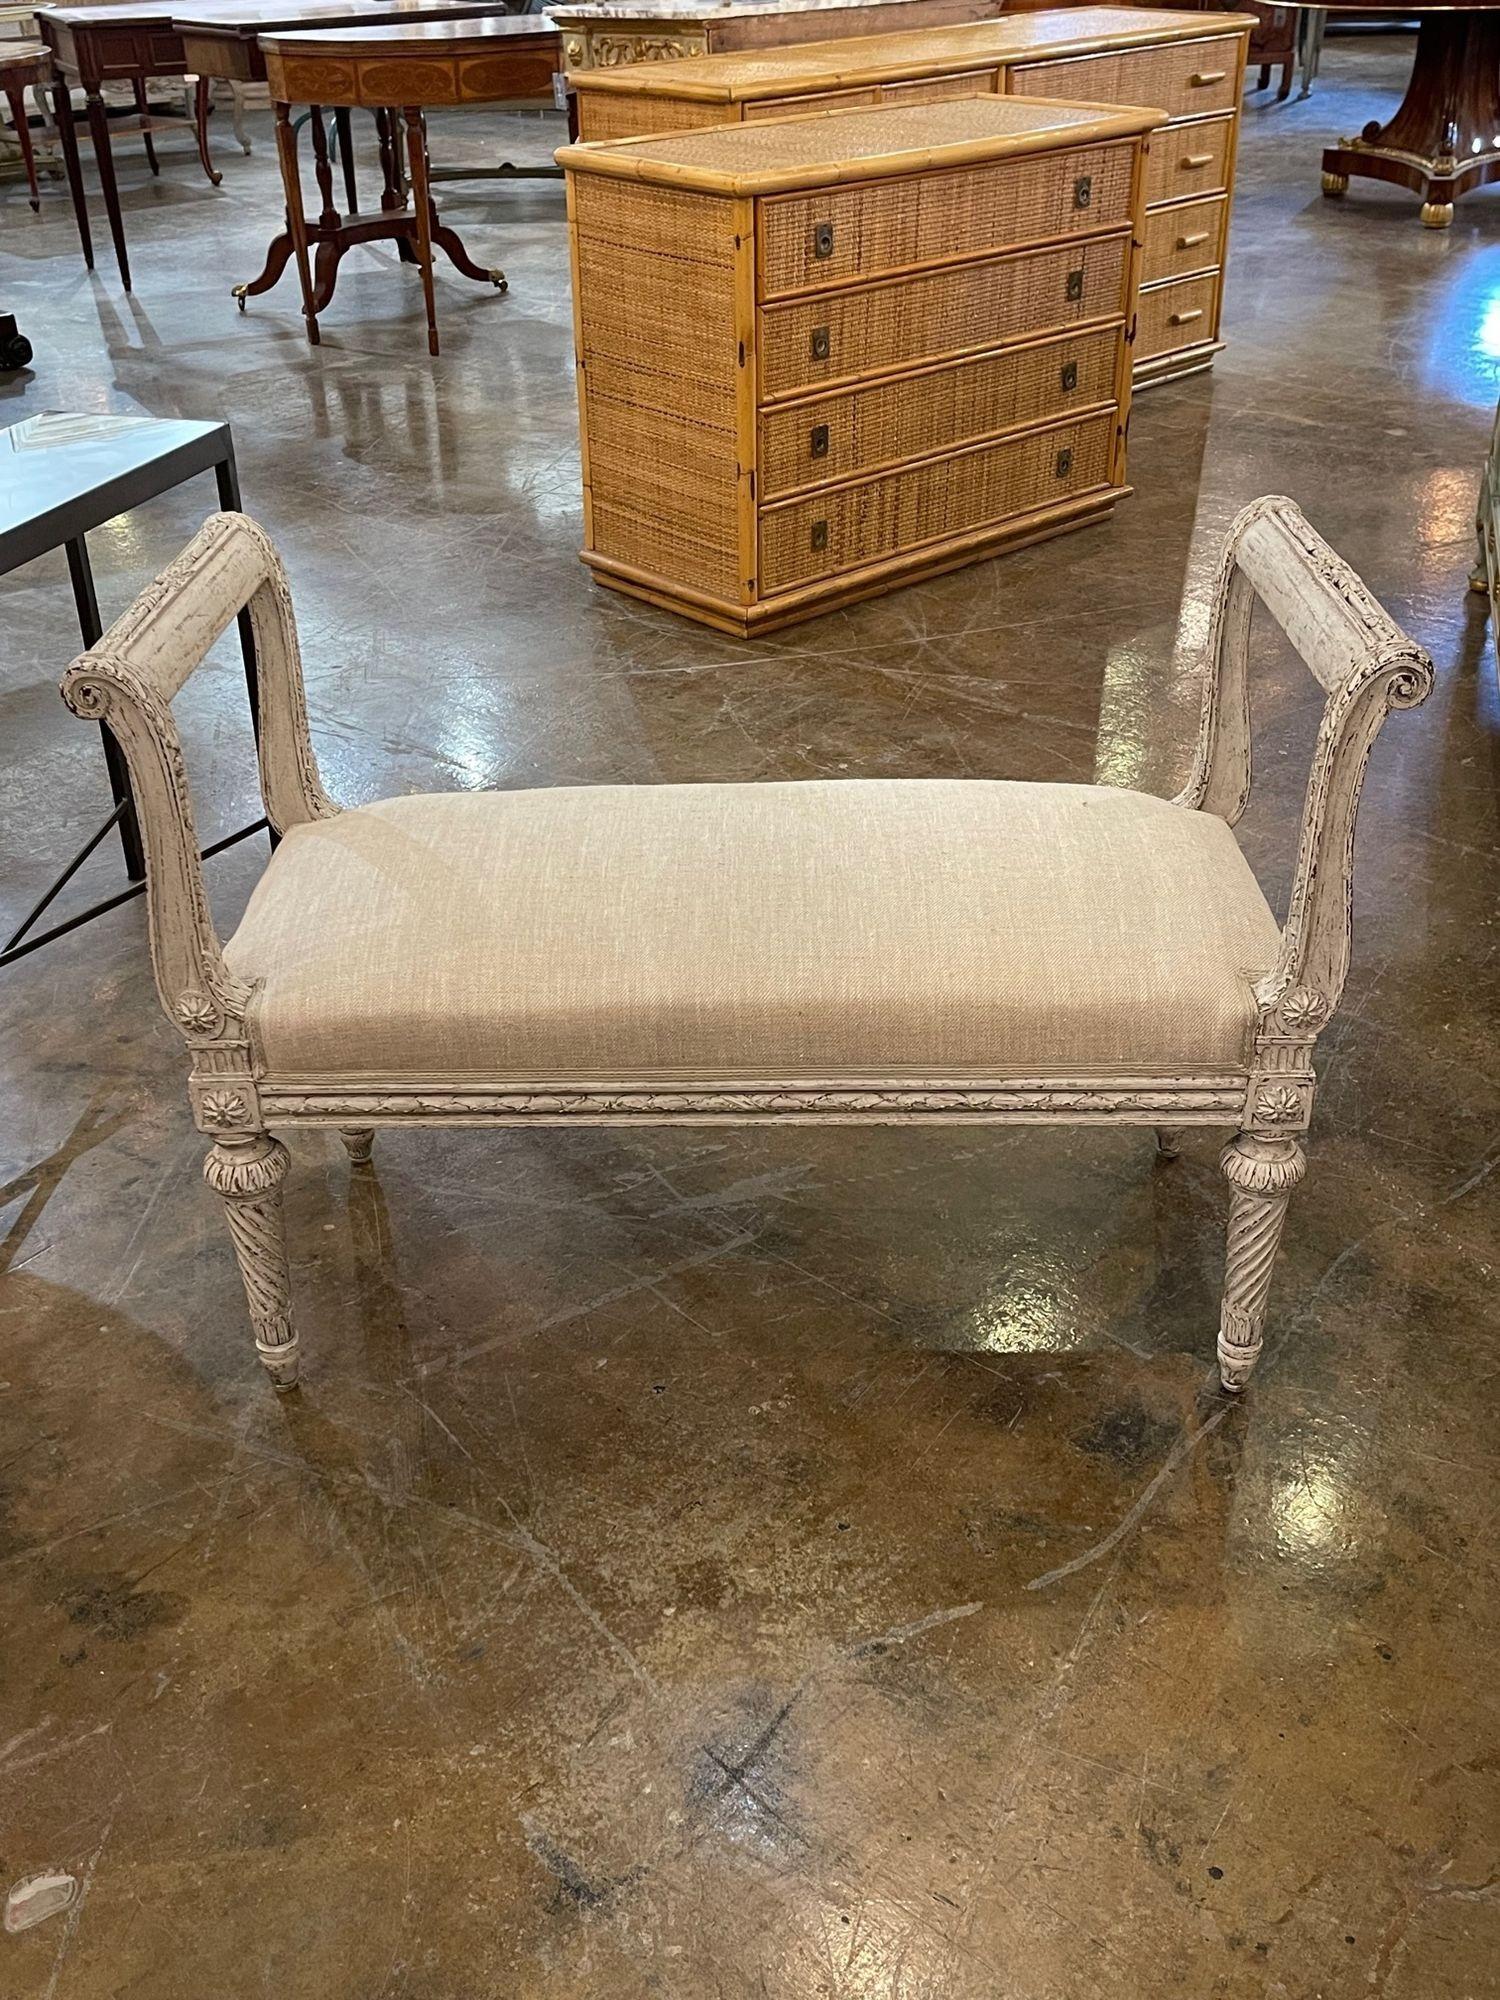 Lovely 19th century Swedish carved and painted bench. This piece has very nice carvings and is upholstered in a pretty tan colored fabric. A classic design for a fine home!